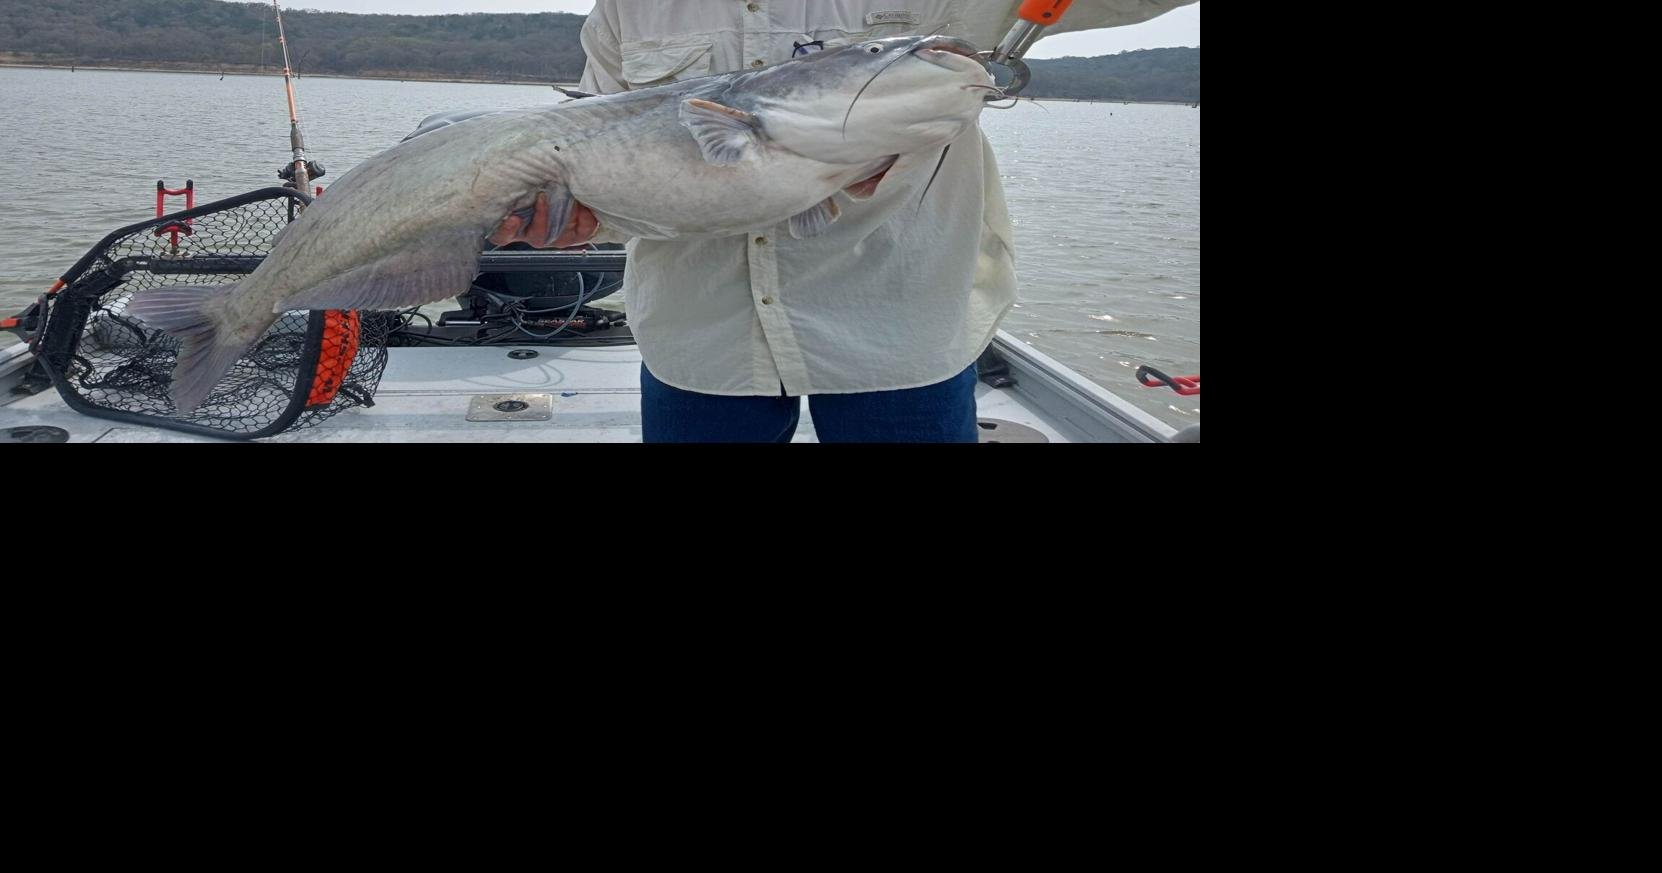 Fishing Report: Blue catfish making a comeback; tough angling in